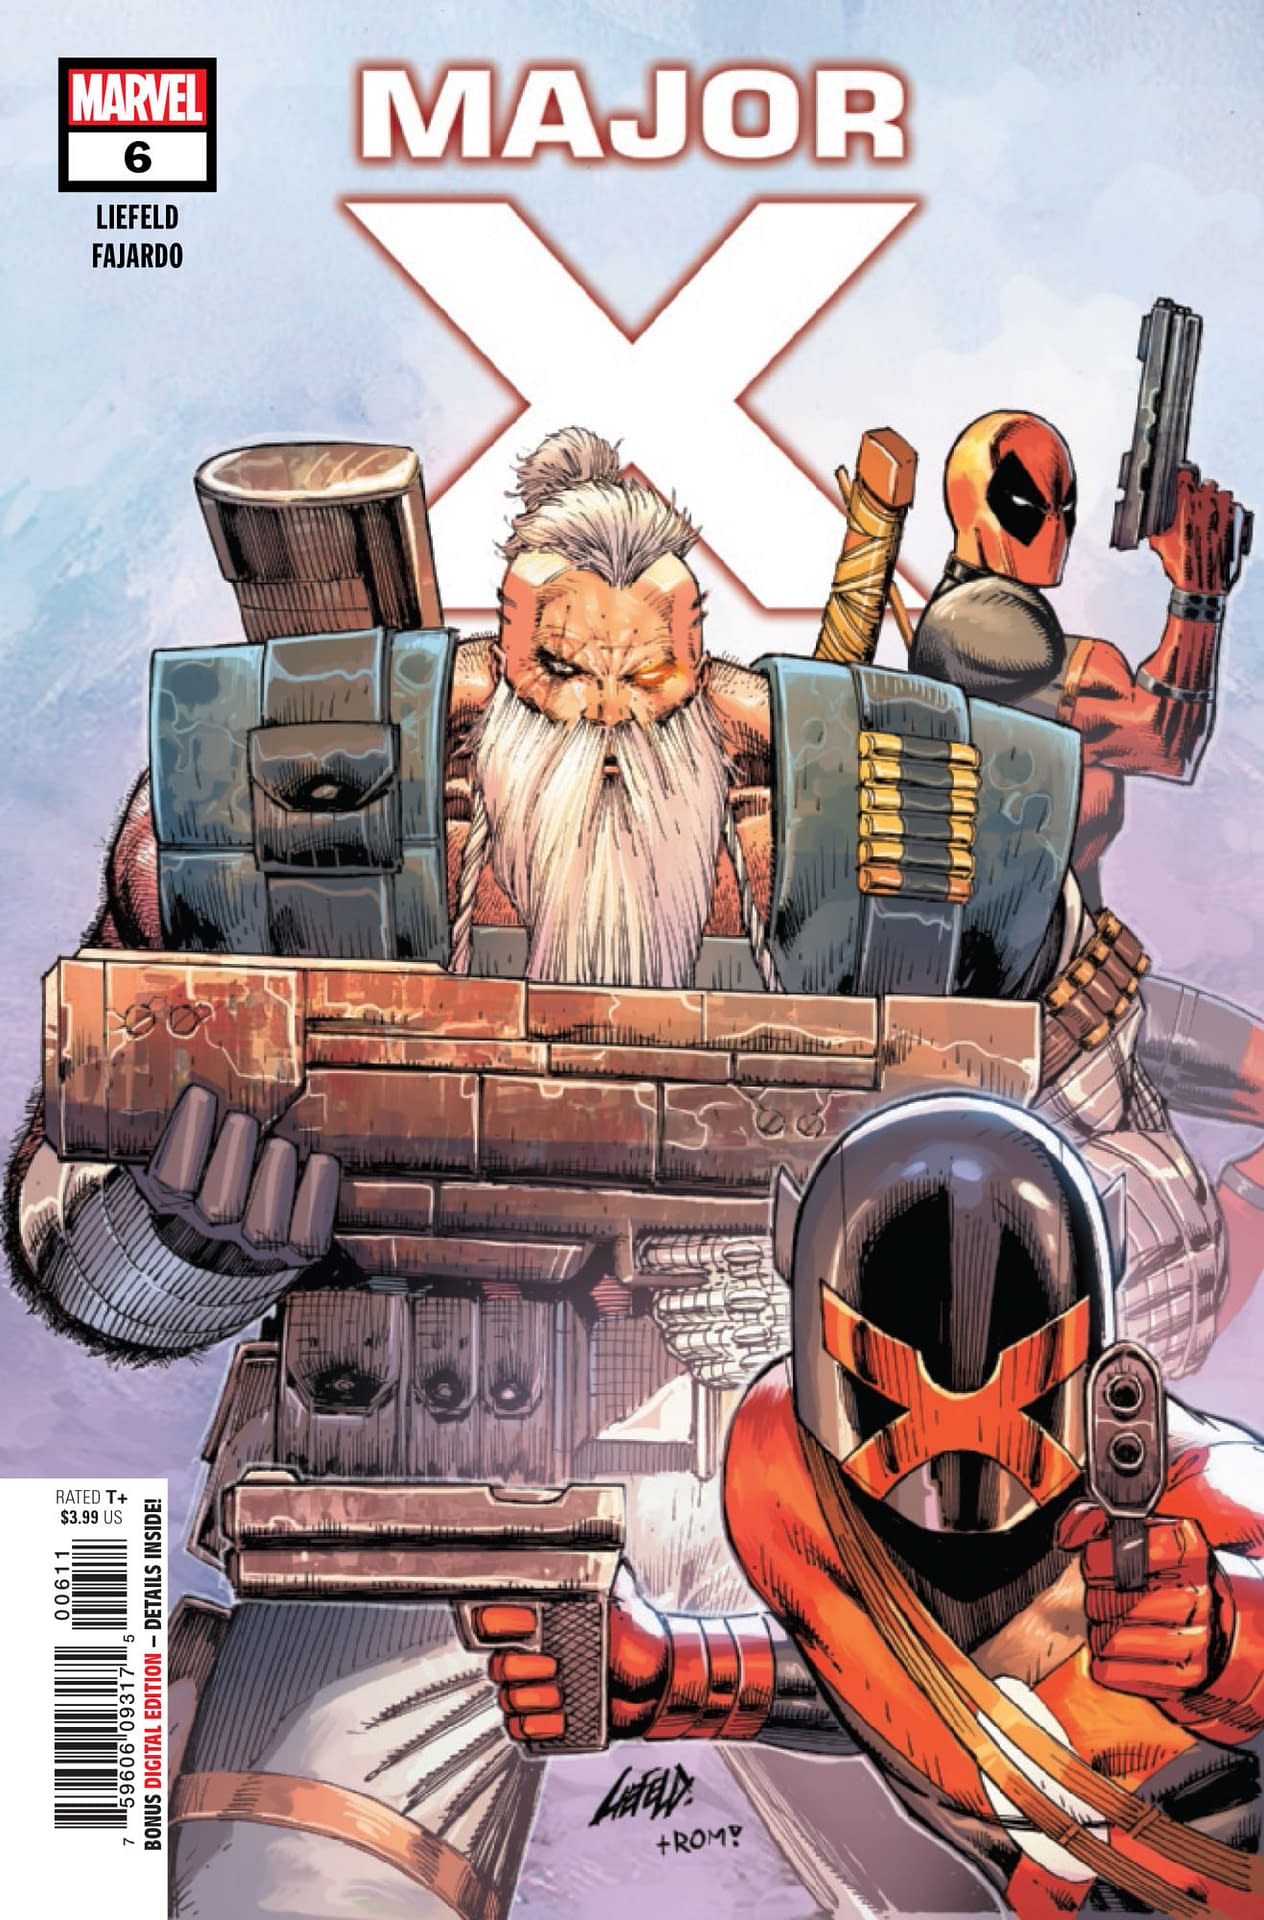 Deadpool Joins the Fight... But on Whose Side? Major X #6 Preview